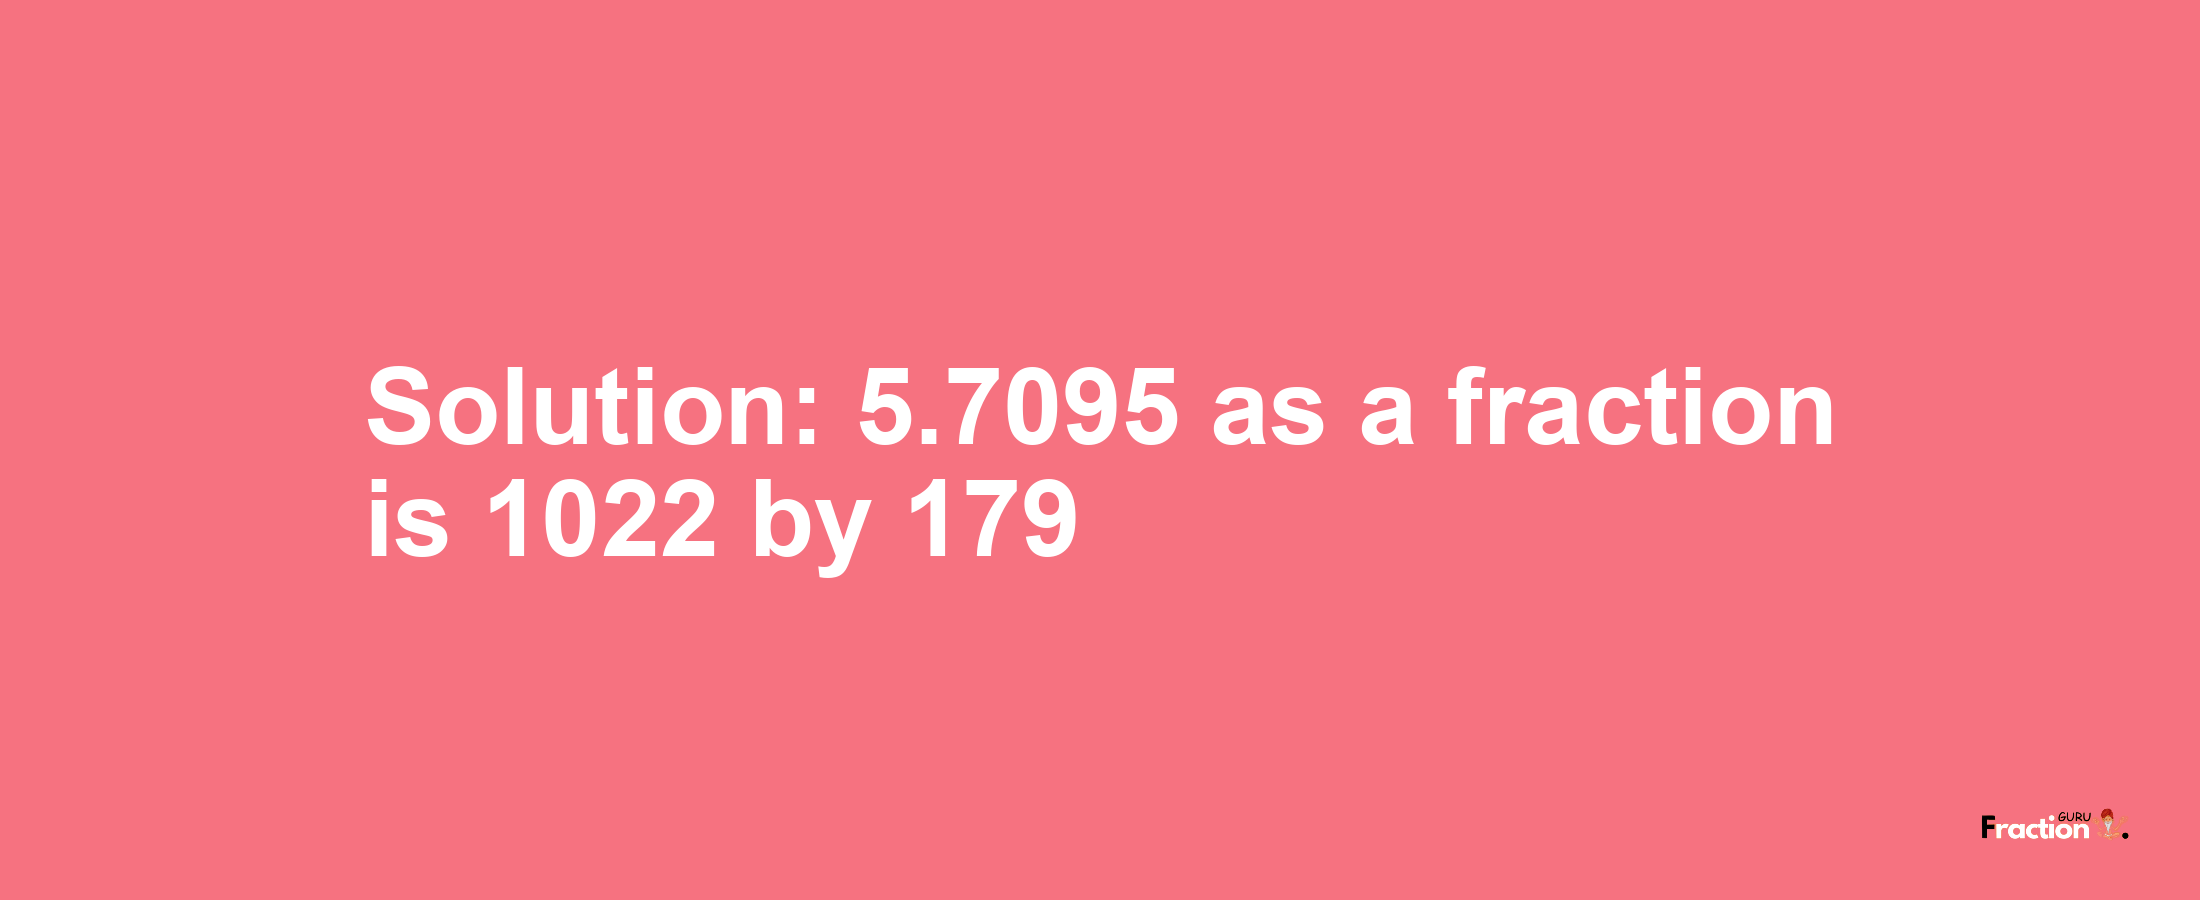 Solution:5.7095 as a fraction is 1022/179